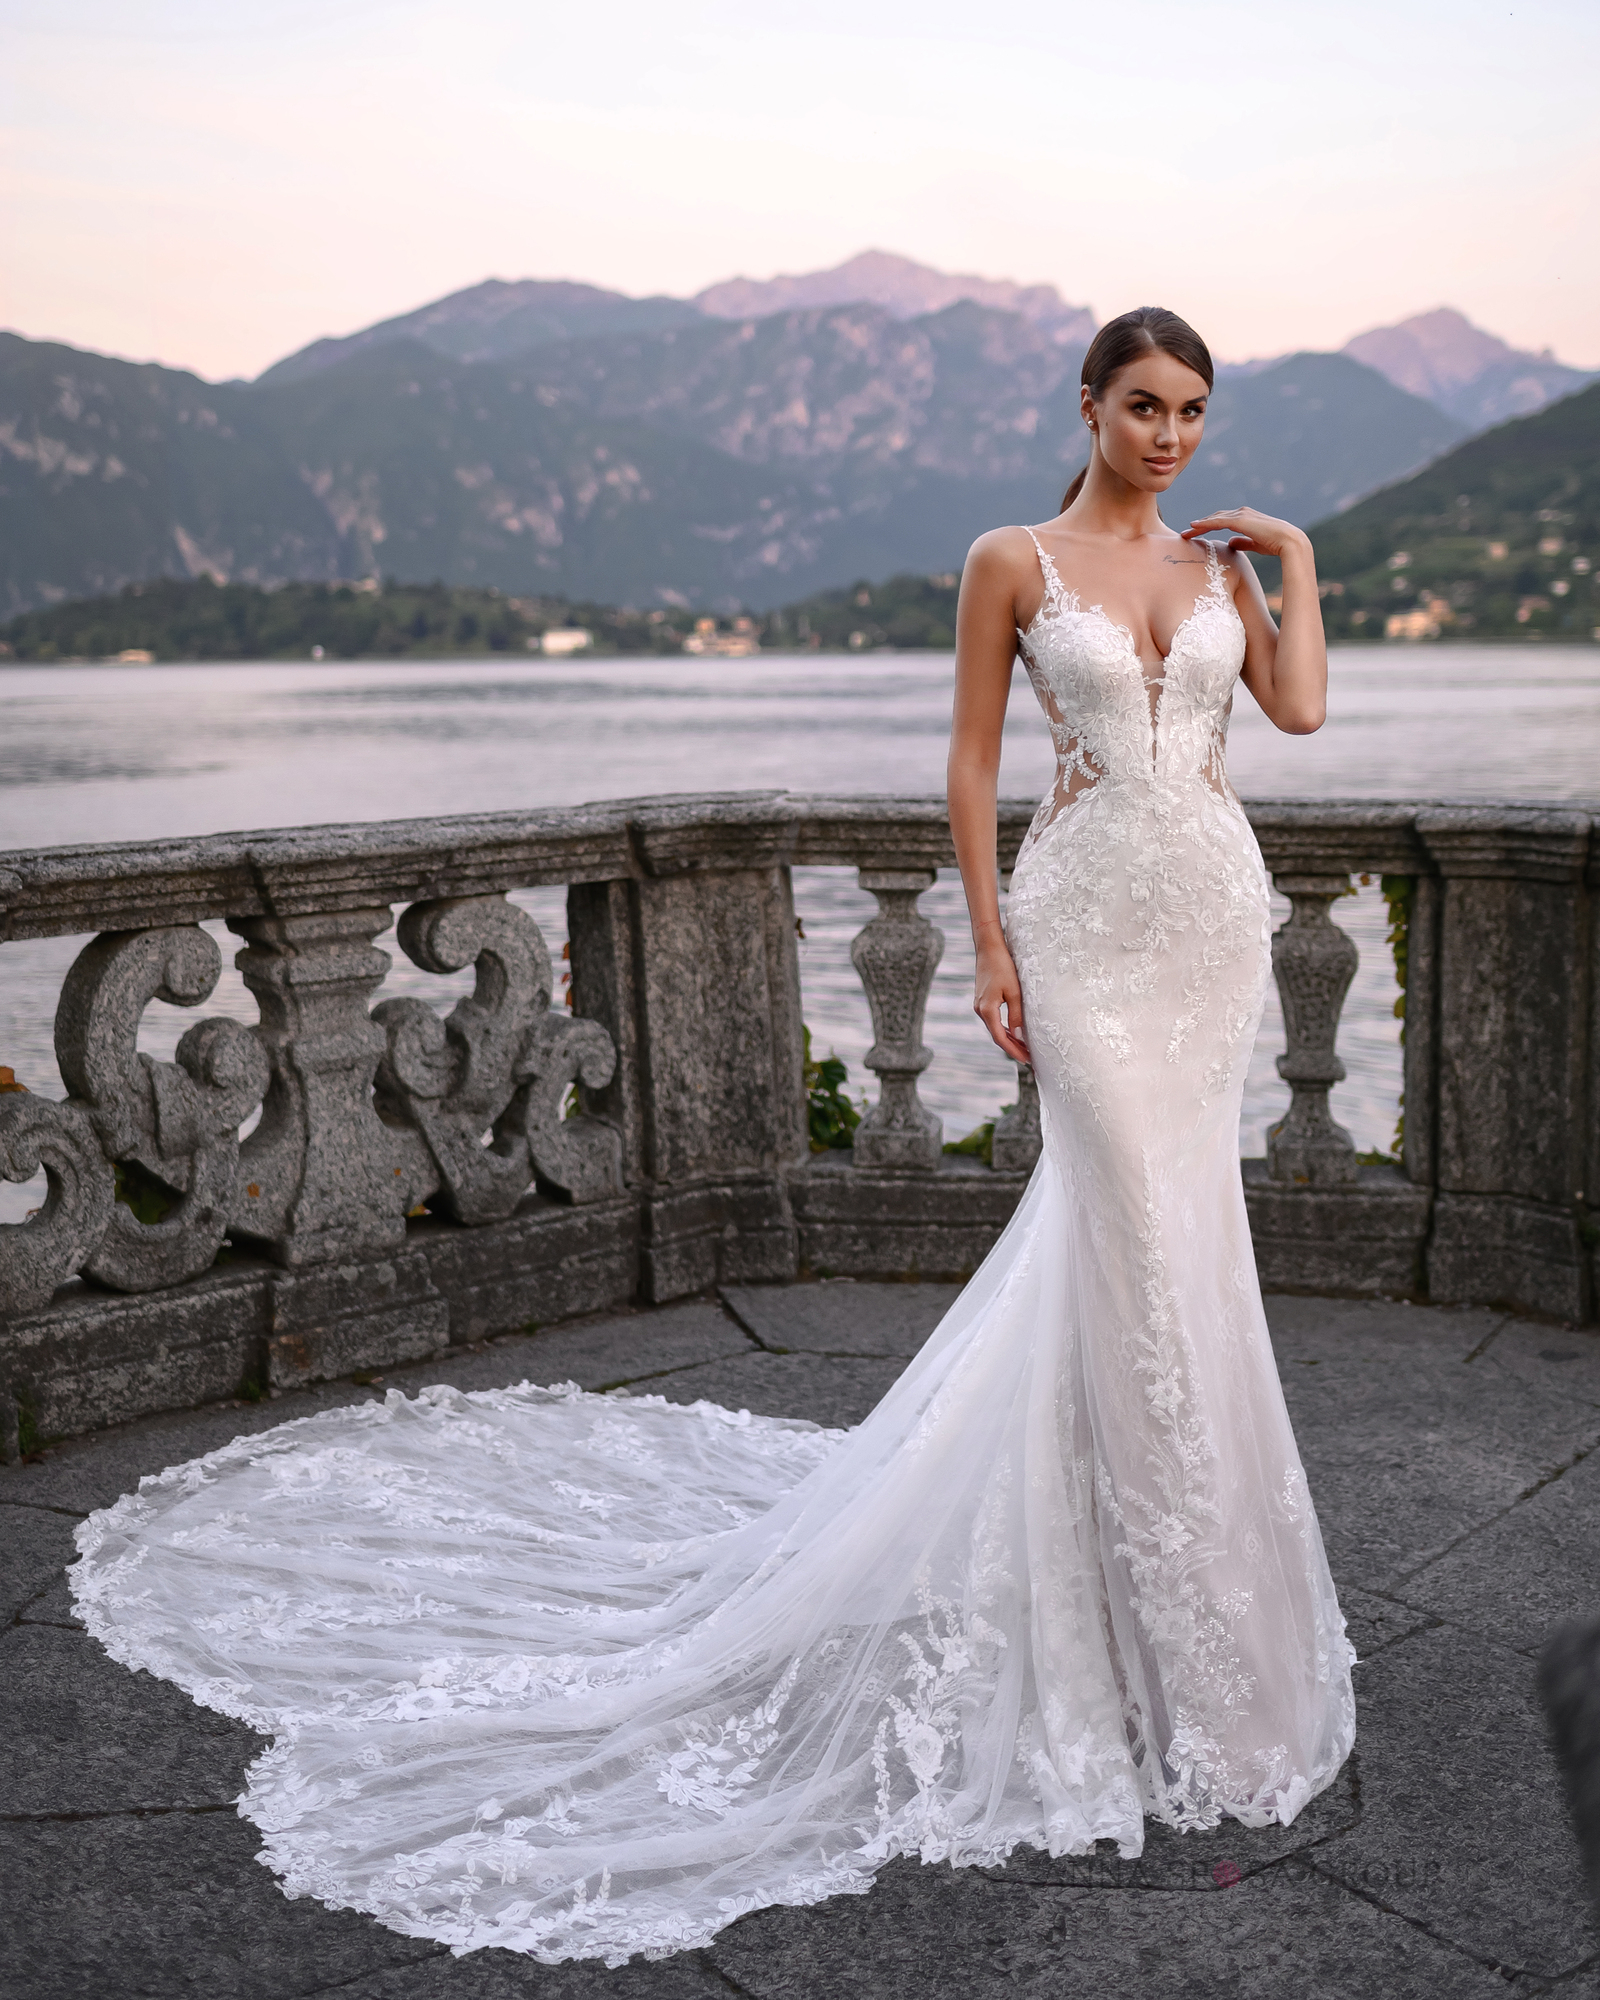 https://lovejunebridal.com/wp-content/uploads/2023/05/Luxury-Lace-Mermaid-Wedding-Gowns-for-Women-2023-Plunging-Sexy-Bridal-Boho-Wedding-Dresses-Cut-Out-Court-Train.png